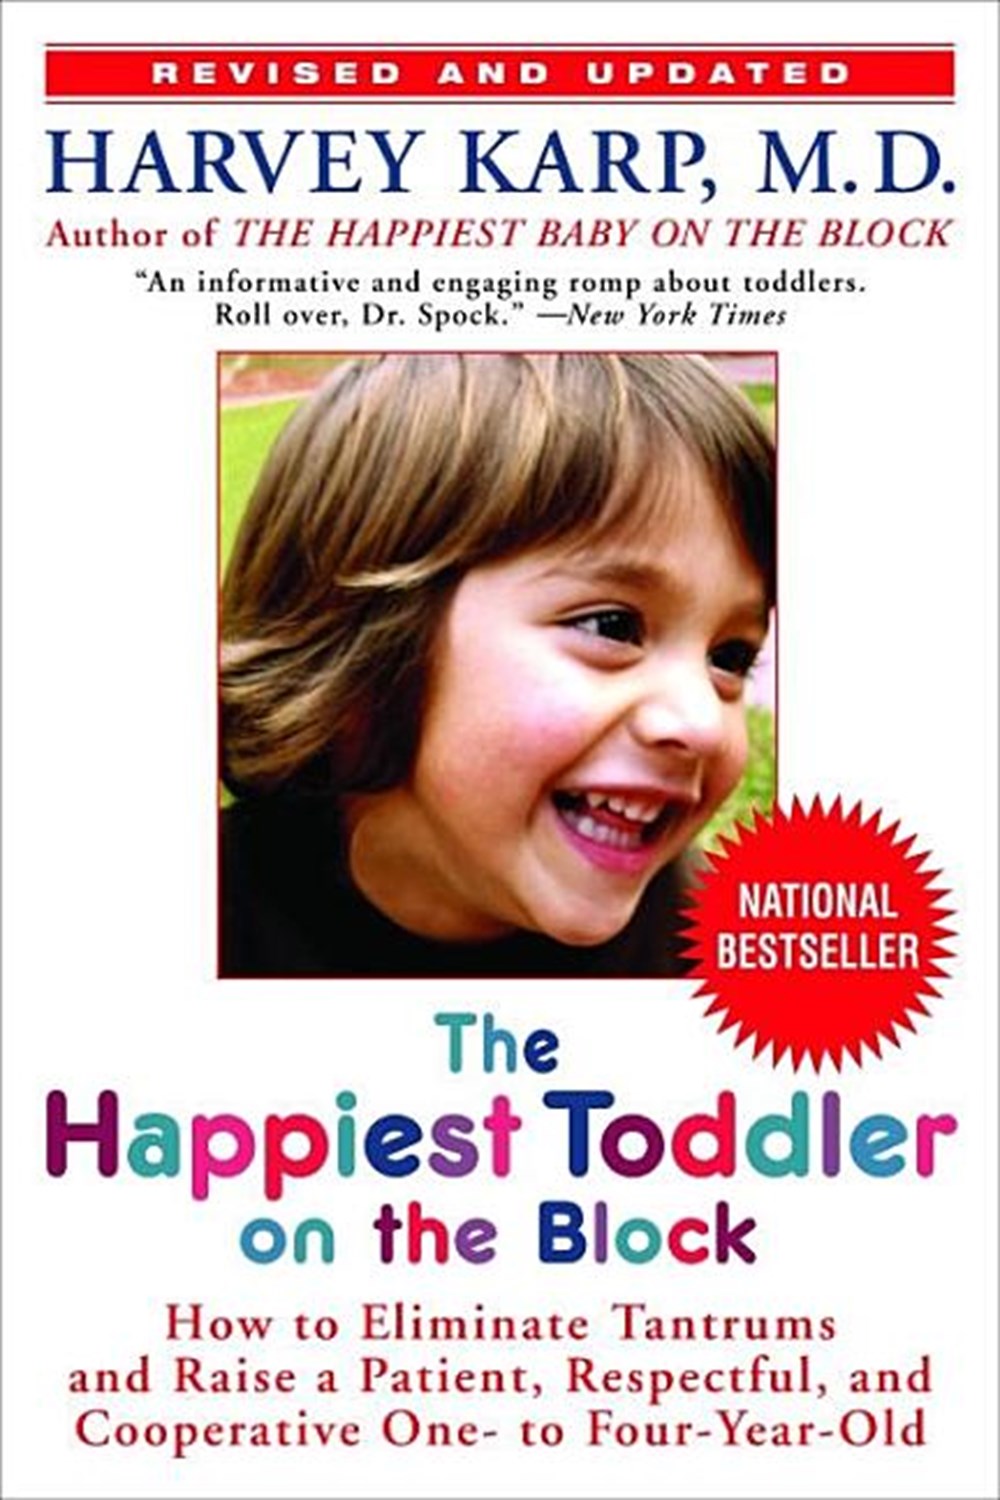 Happiest Toddler on the Block: How to Eliminate Tantrums and Raise a Patient, Respectful, and Cooper